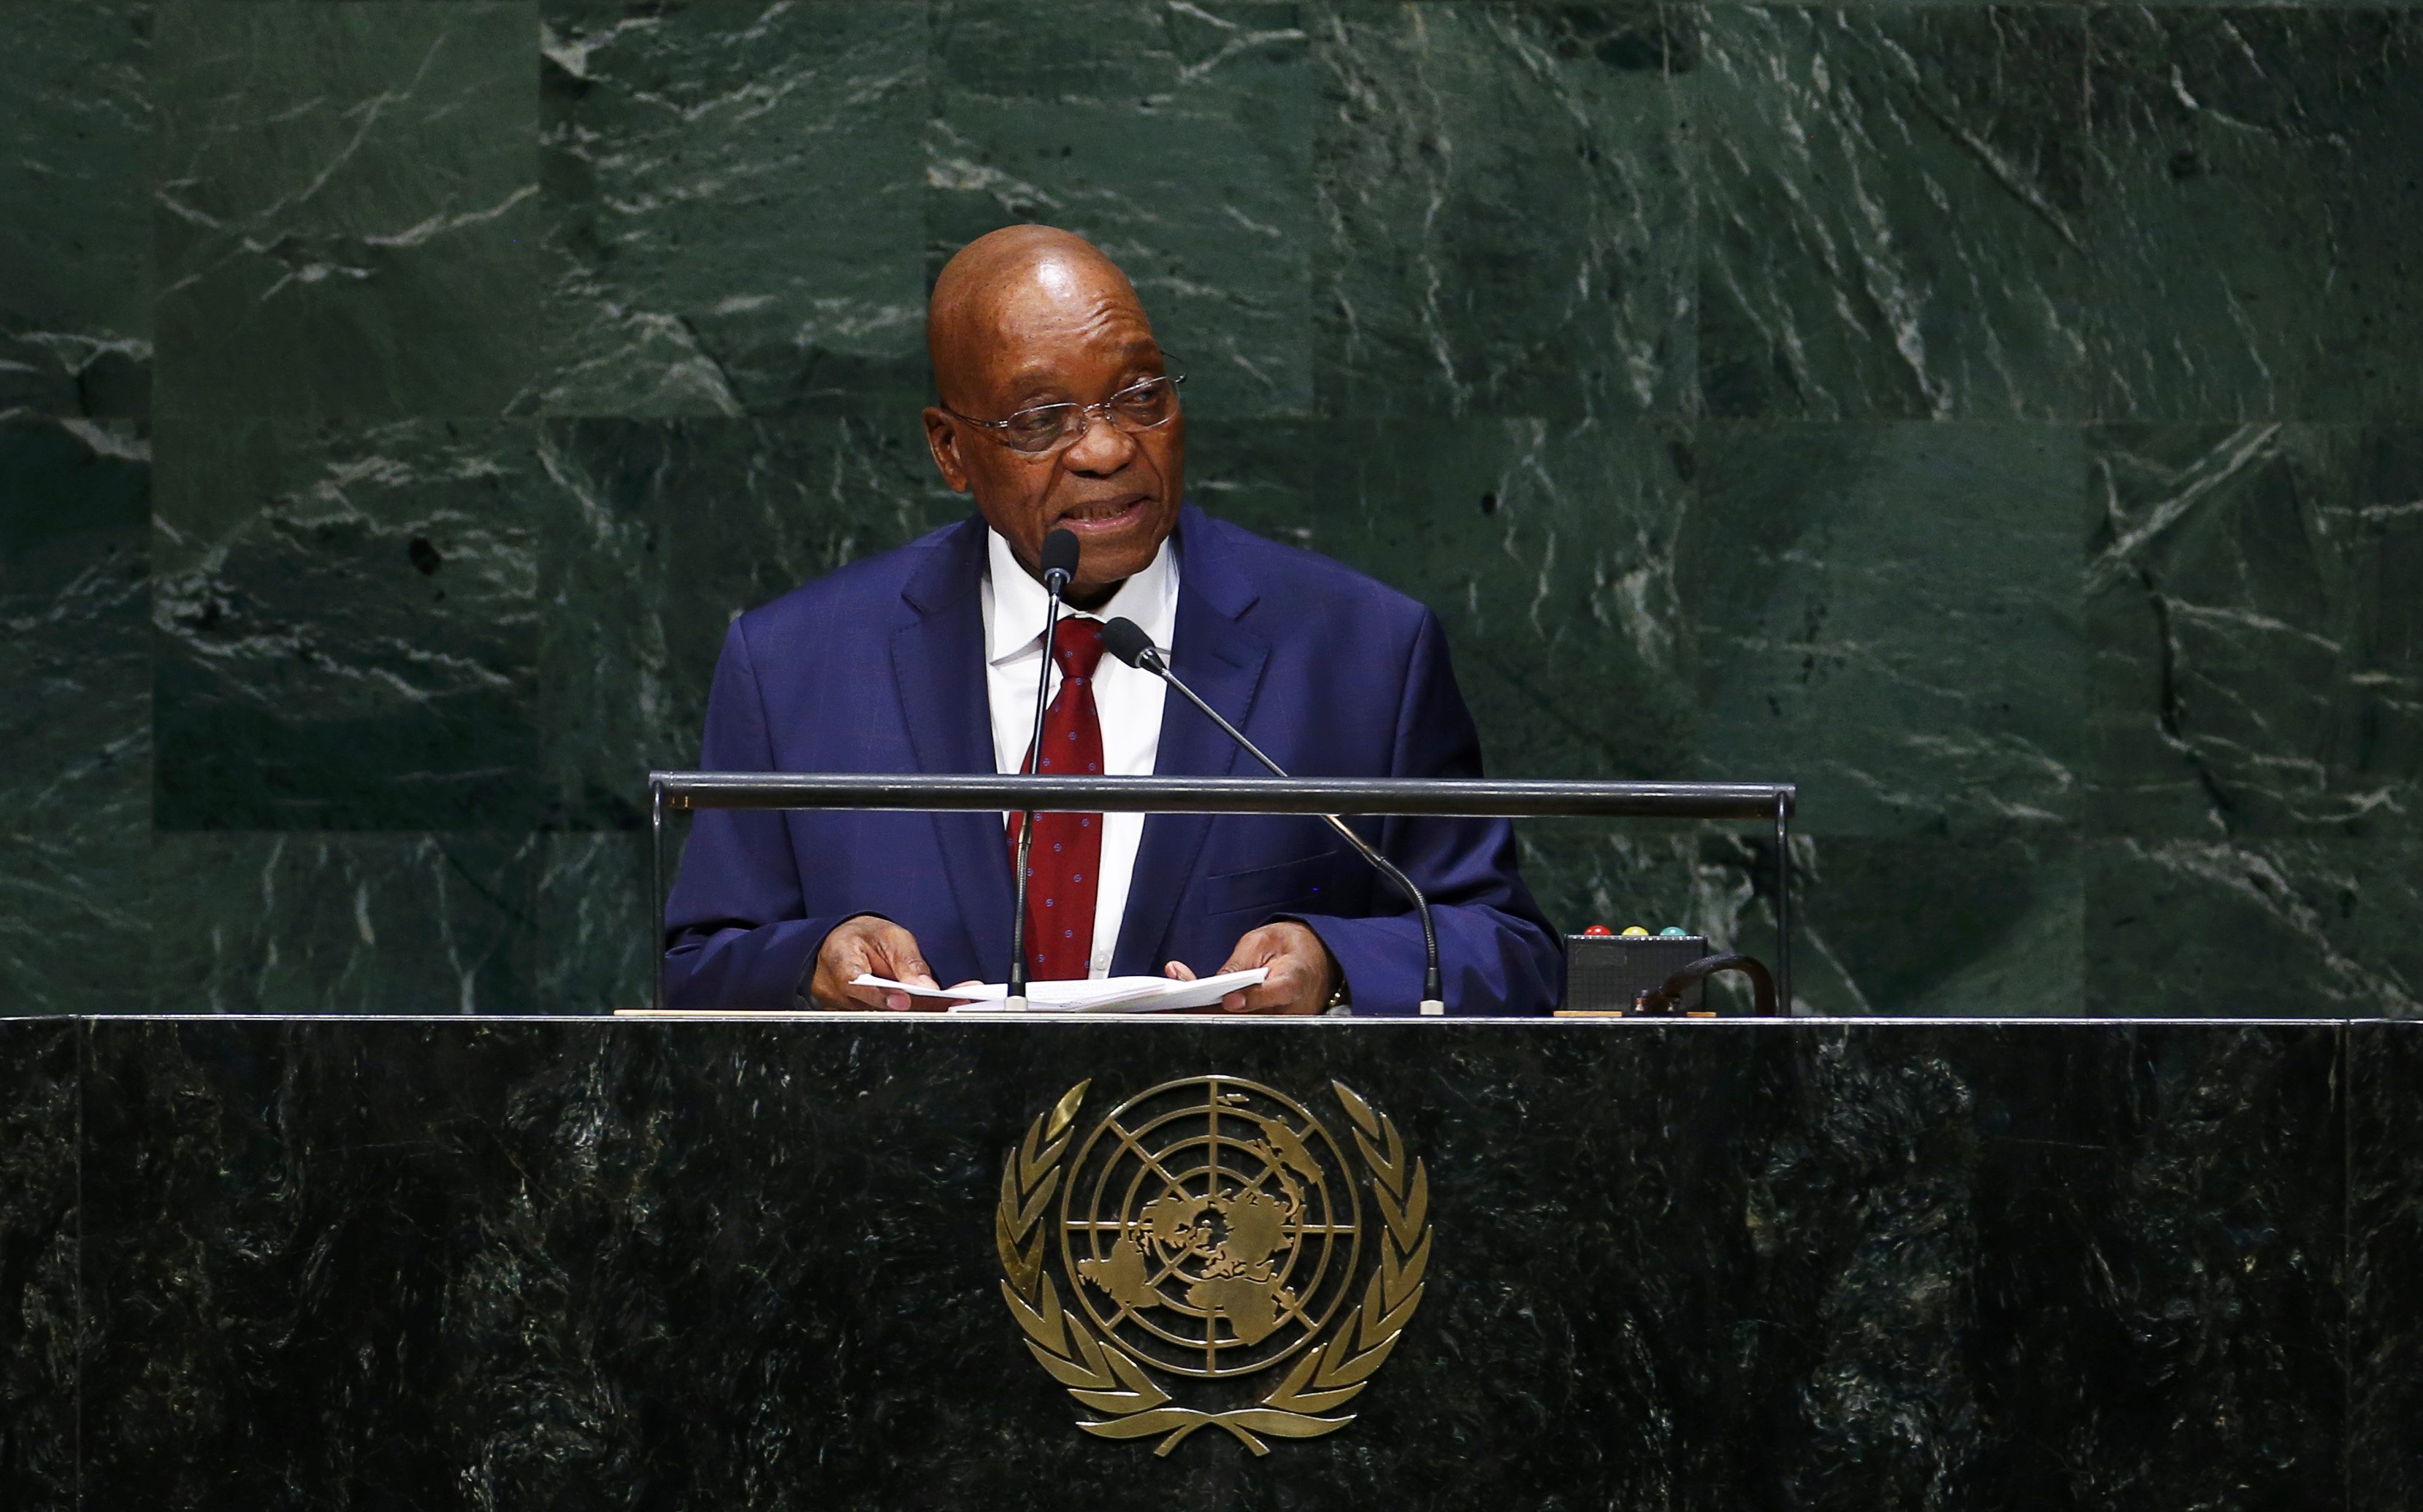 South African President Jacob Zuma prepares to address the 69th United Nations General Assembly at the U.N. headquarters in New York September 24, 2014. (Photo: Reuters)